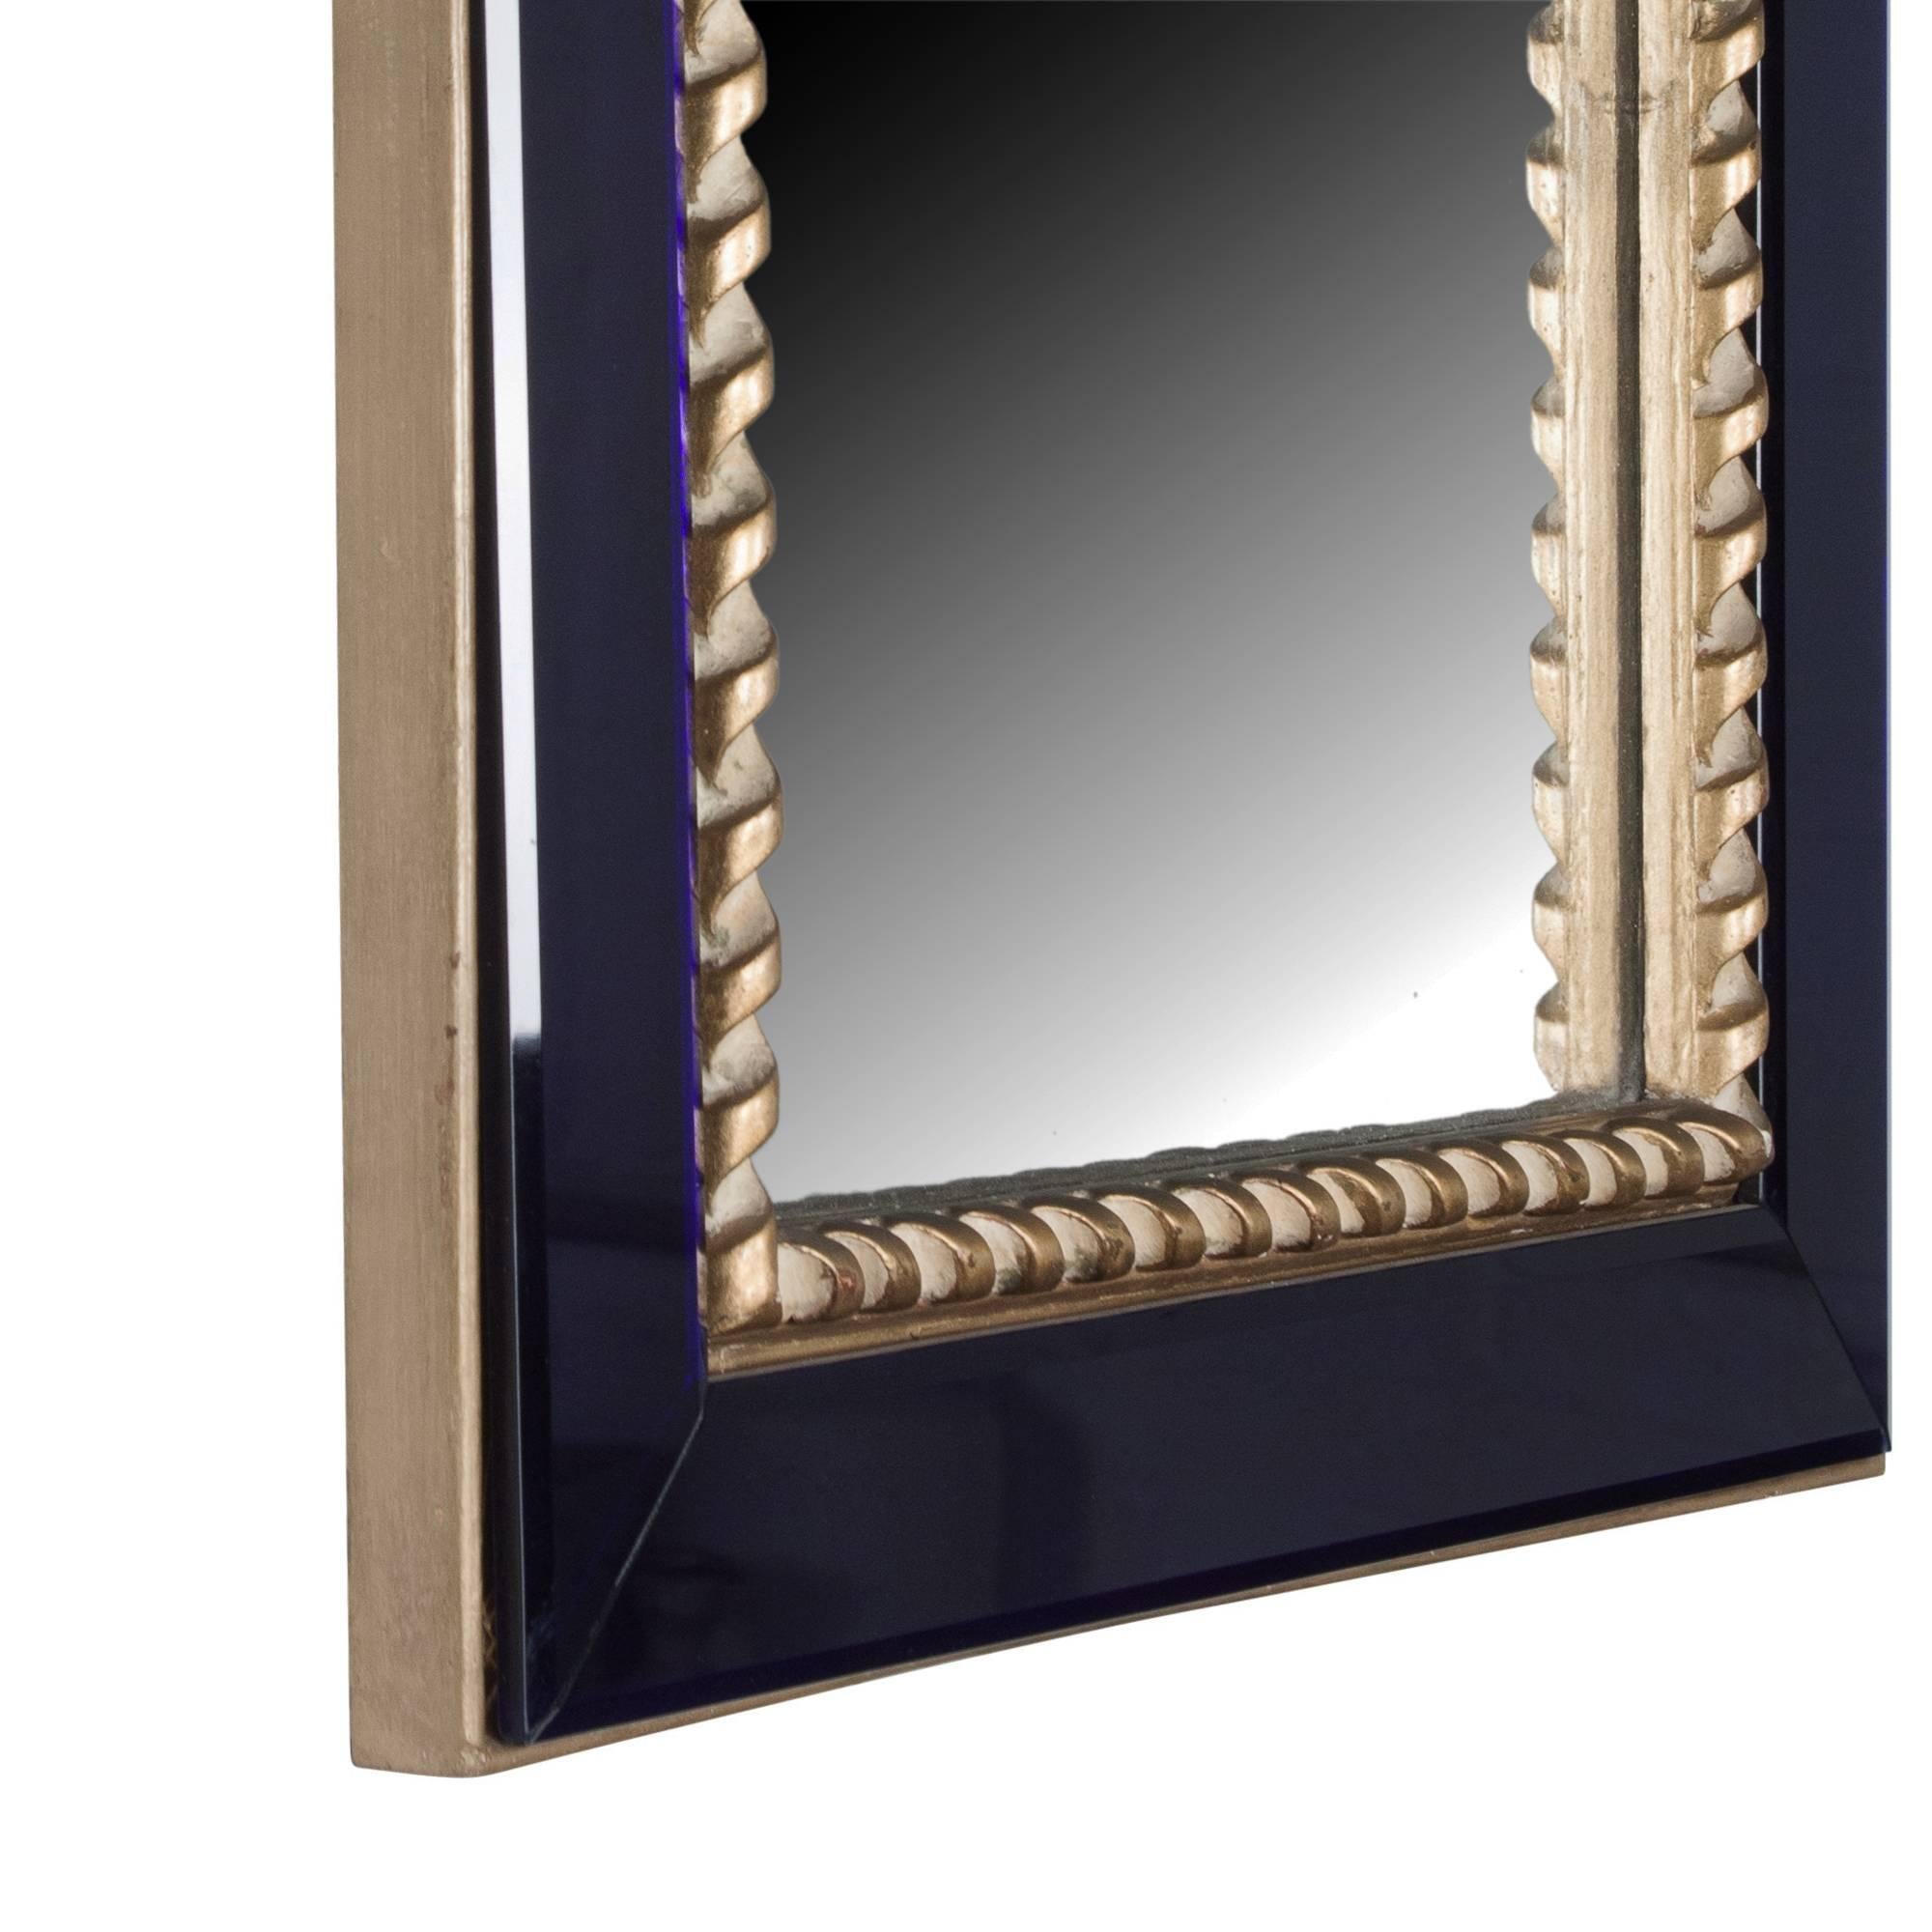 Mid-20th Century Blue Glass Frame Wall Mirror with Gilt Rope Border, by Pierre Lardin